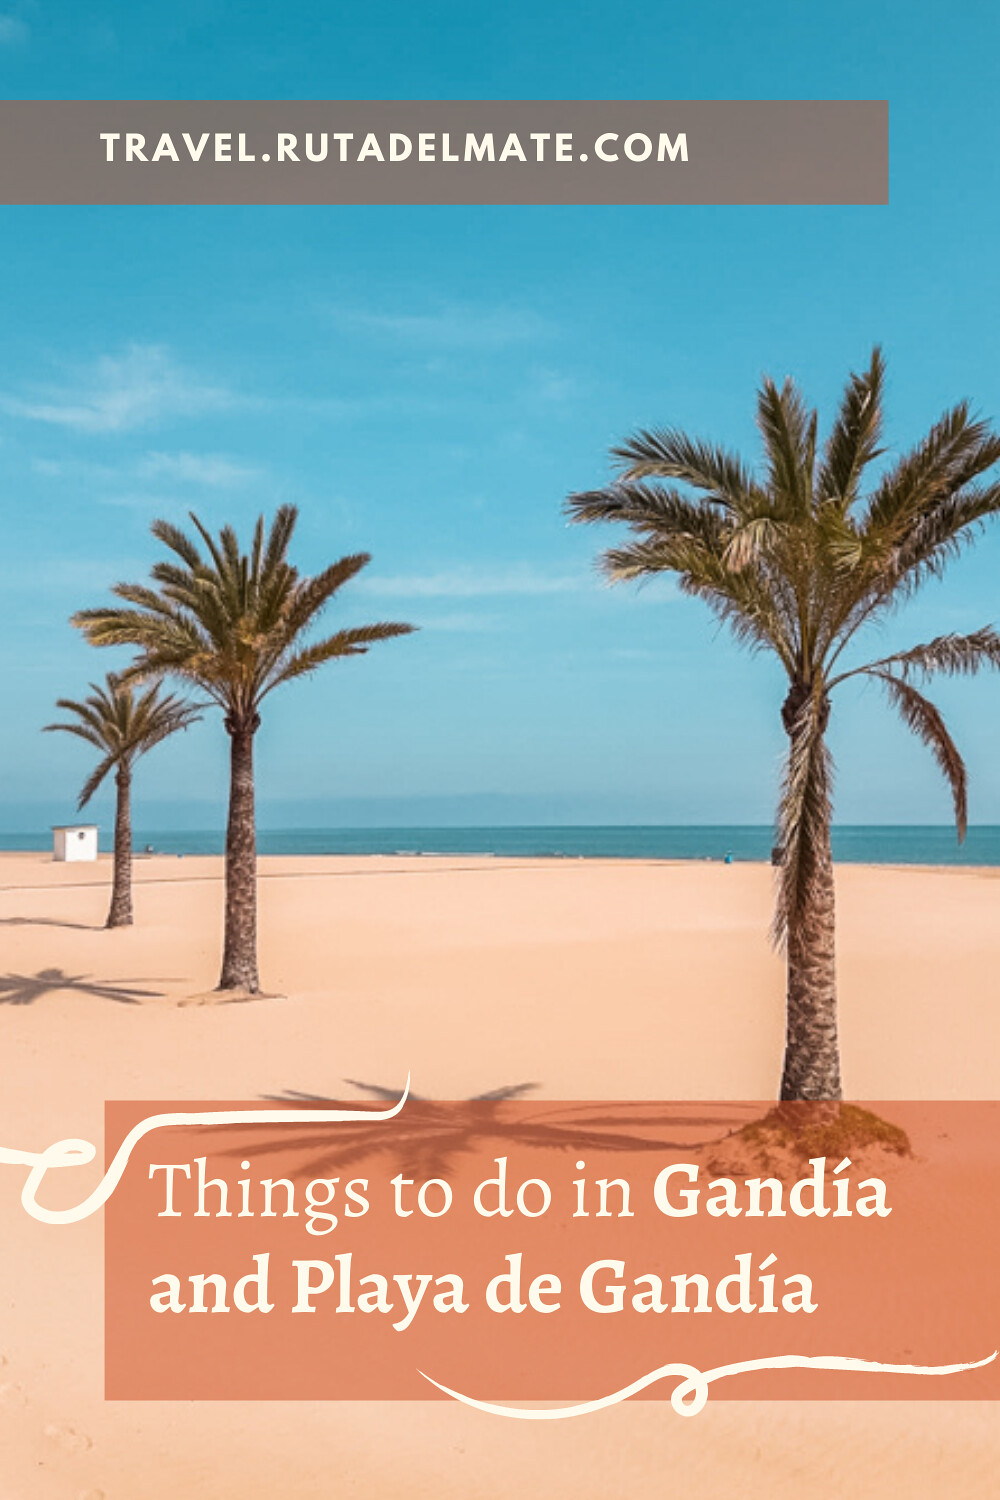 Things to do in Gandía and Playa de Gandía, our home